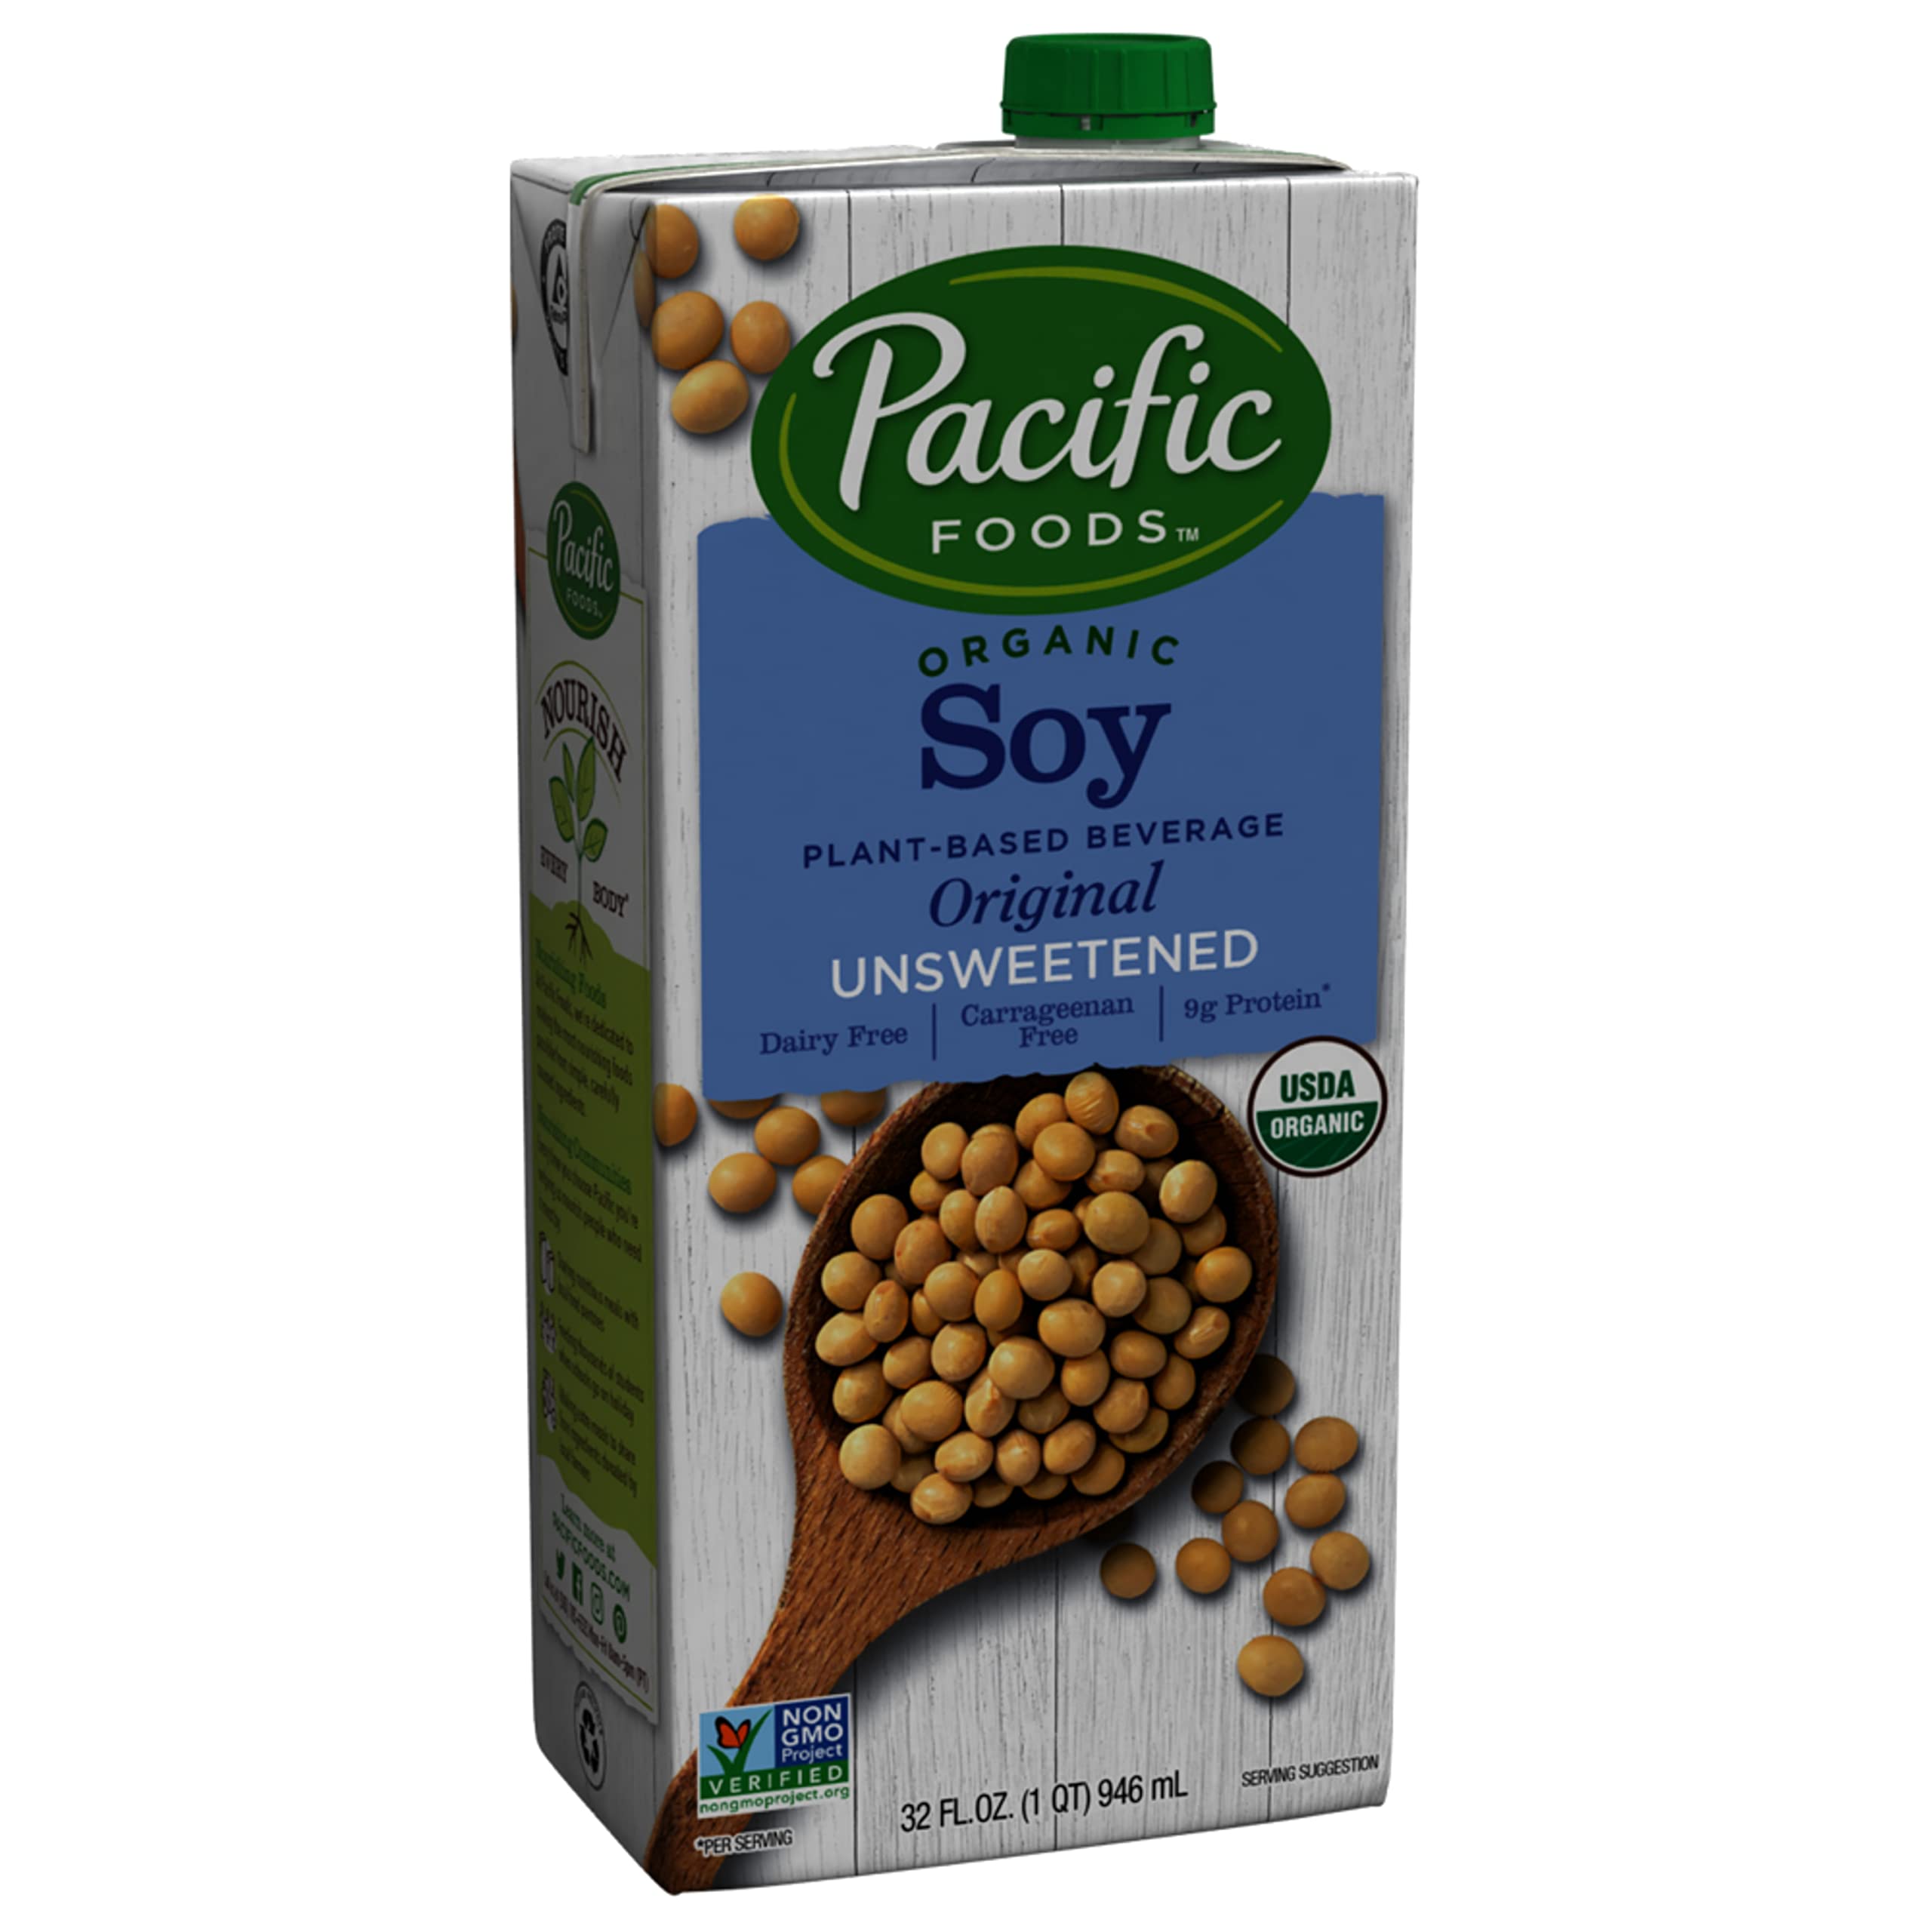 Pacific Foods Organic Soy Unsweetened Original Plant-Based Beverage